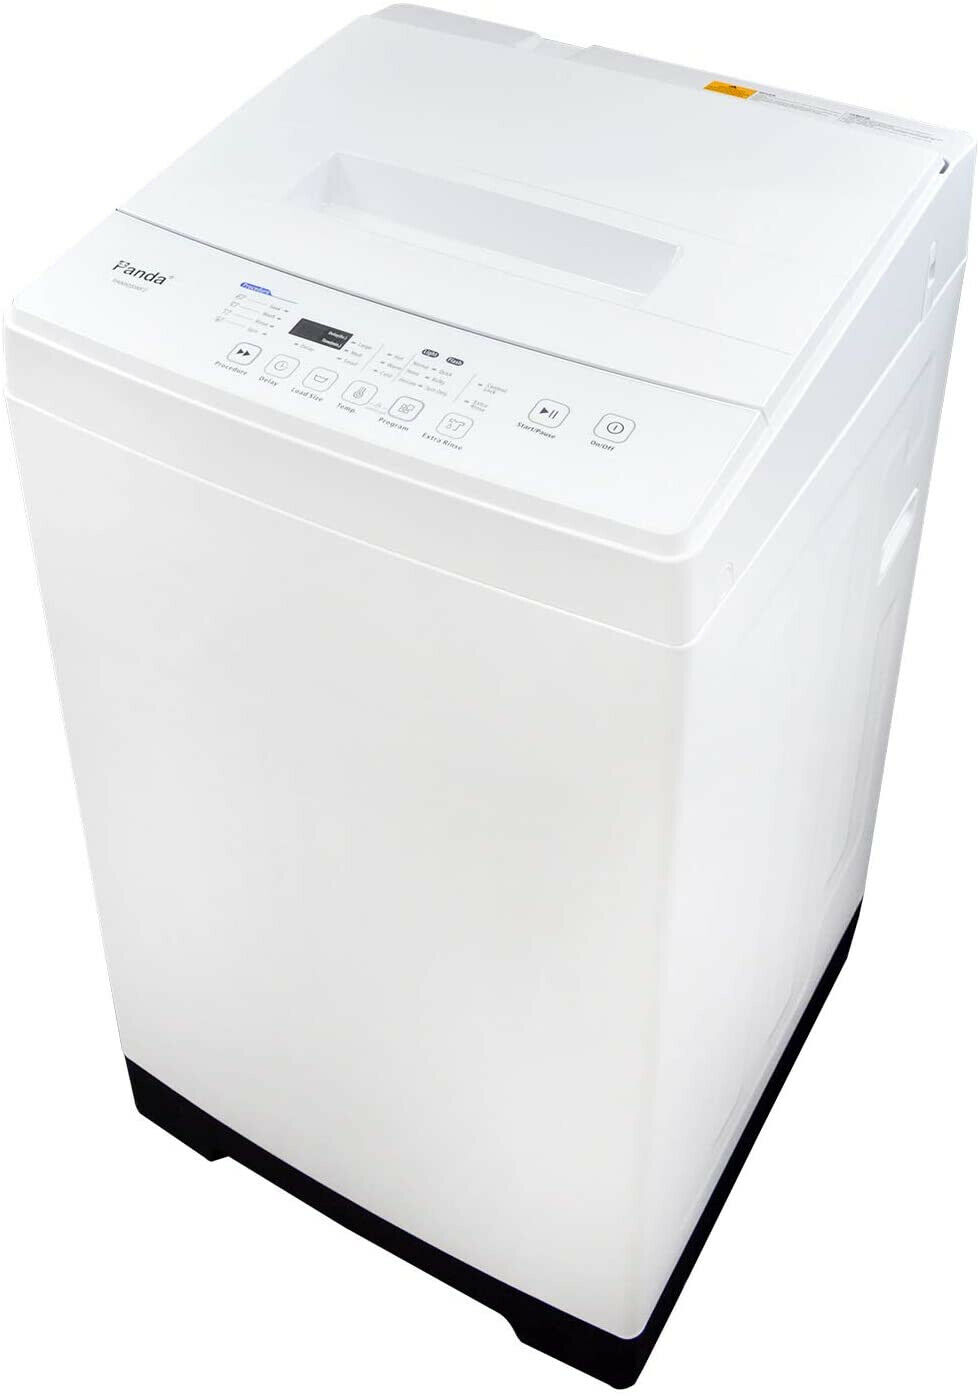 8 Best Portable Washer Dryer Combos (Under 250, 350, 500) Keep It